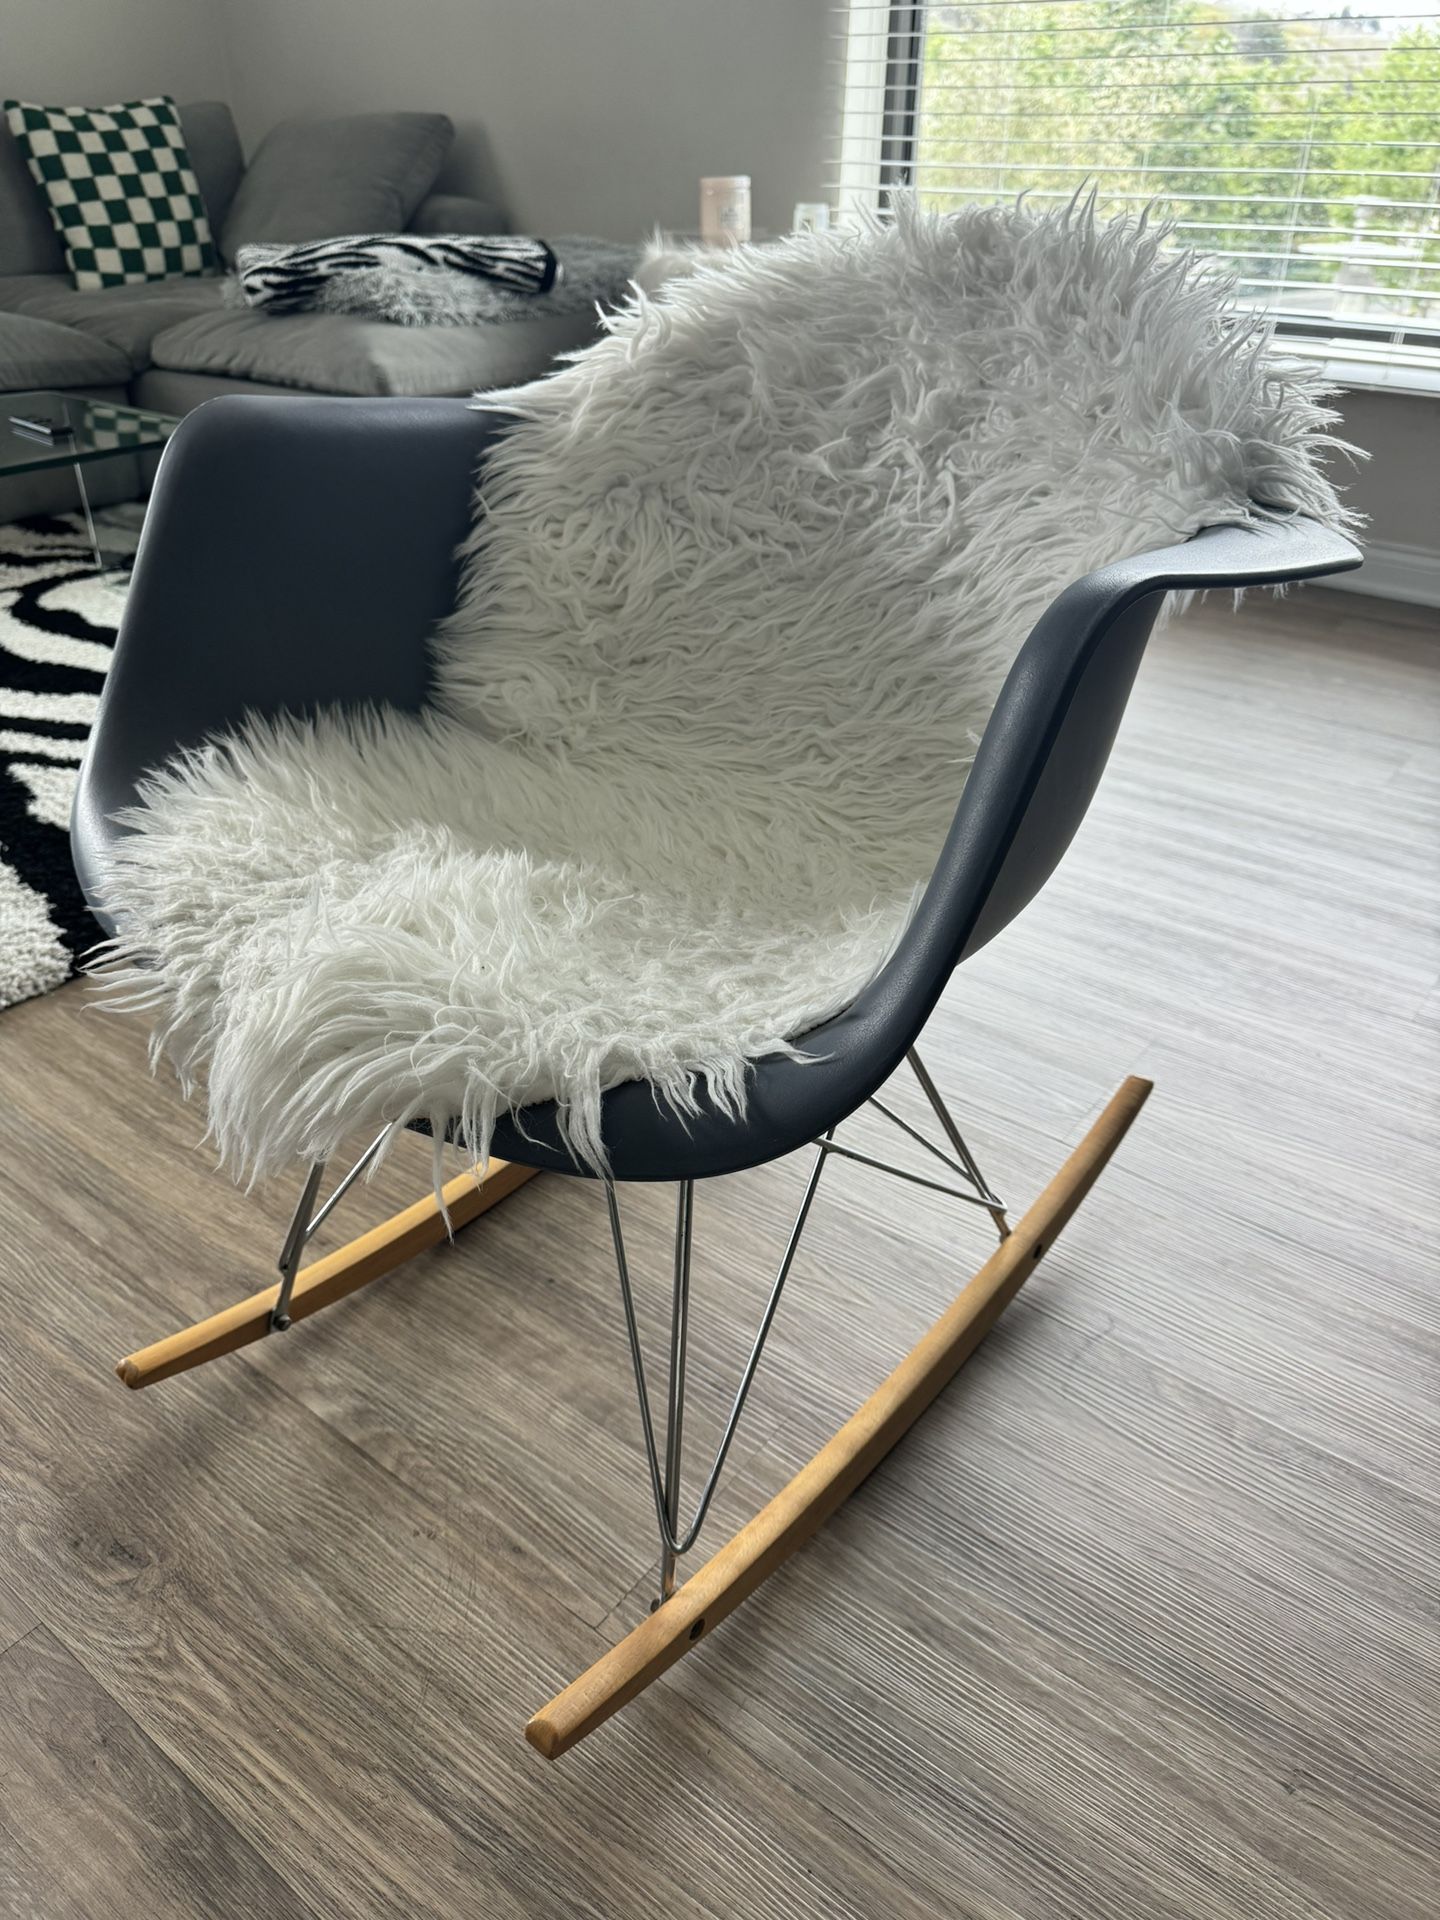 Poly and Bark Rocker Modern Mid-Century Rocking Molded Lounge Chair with Fur Cover Seat Pad